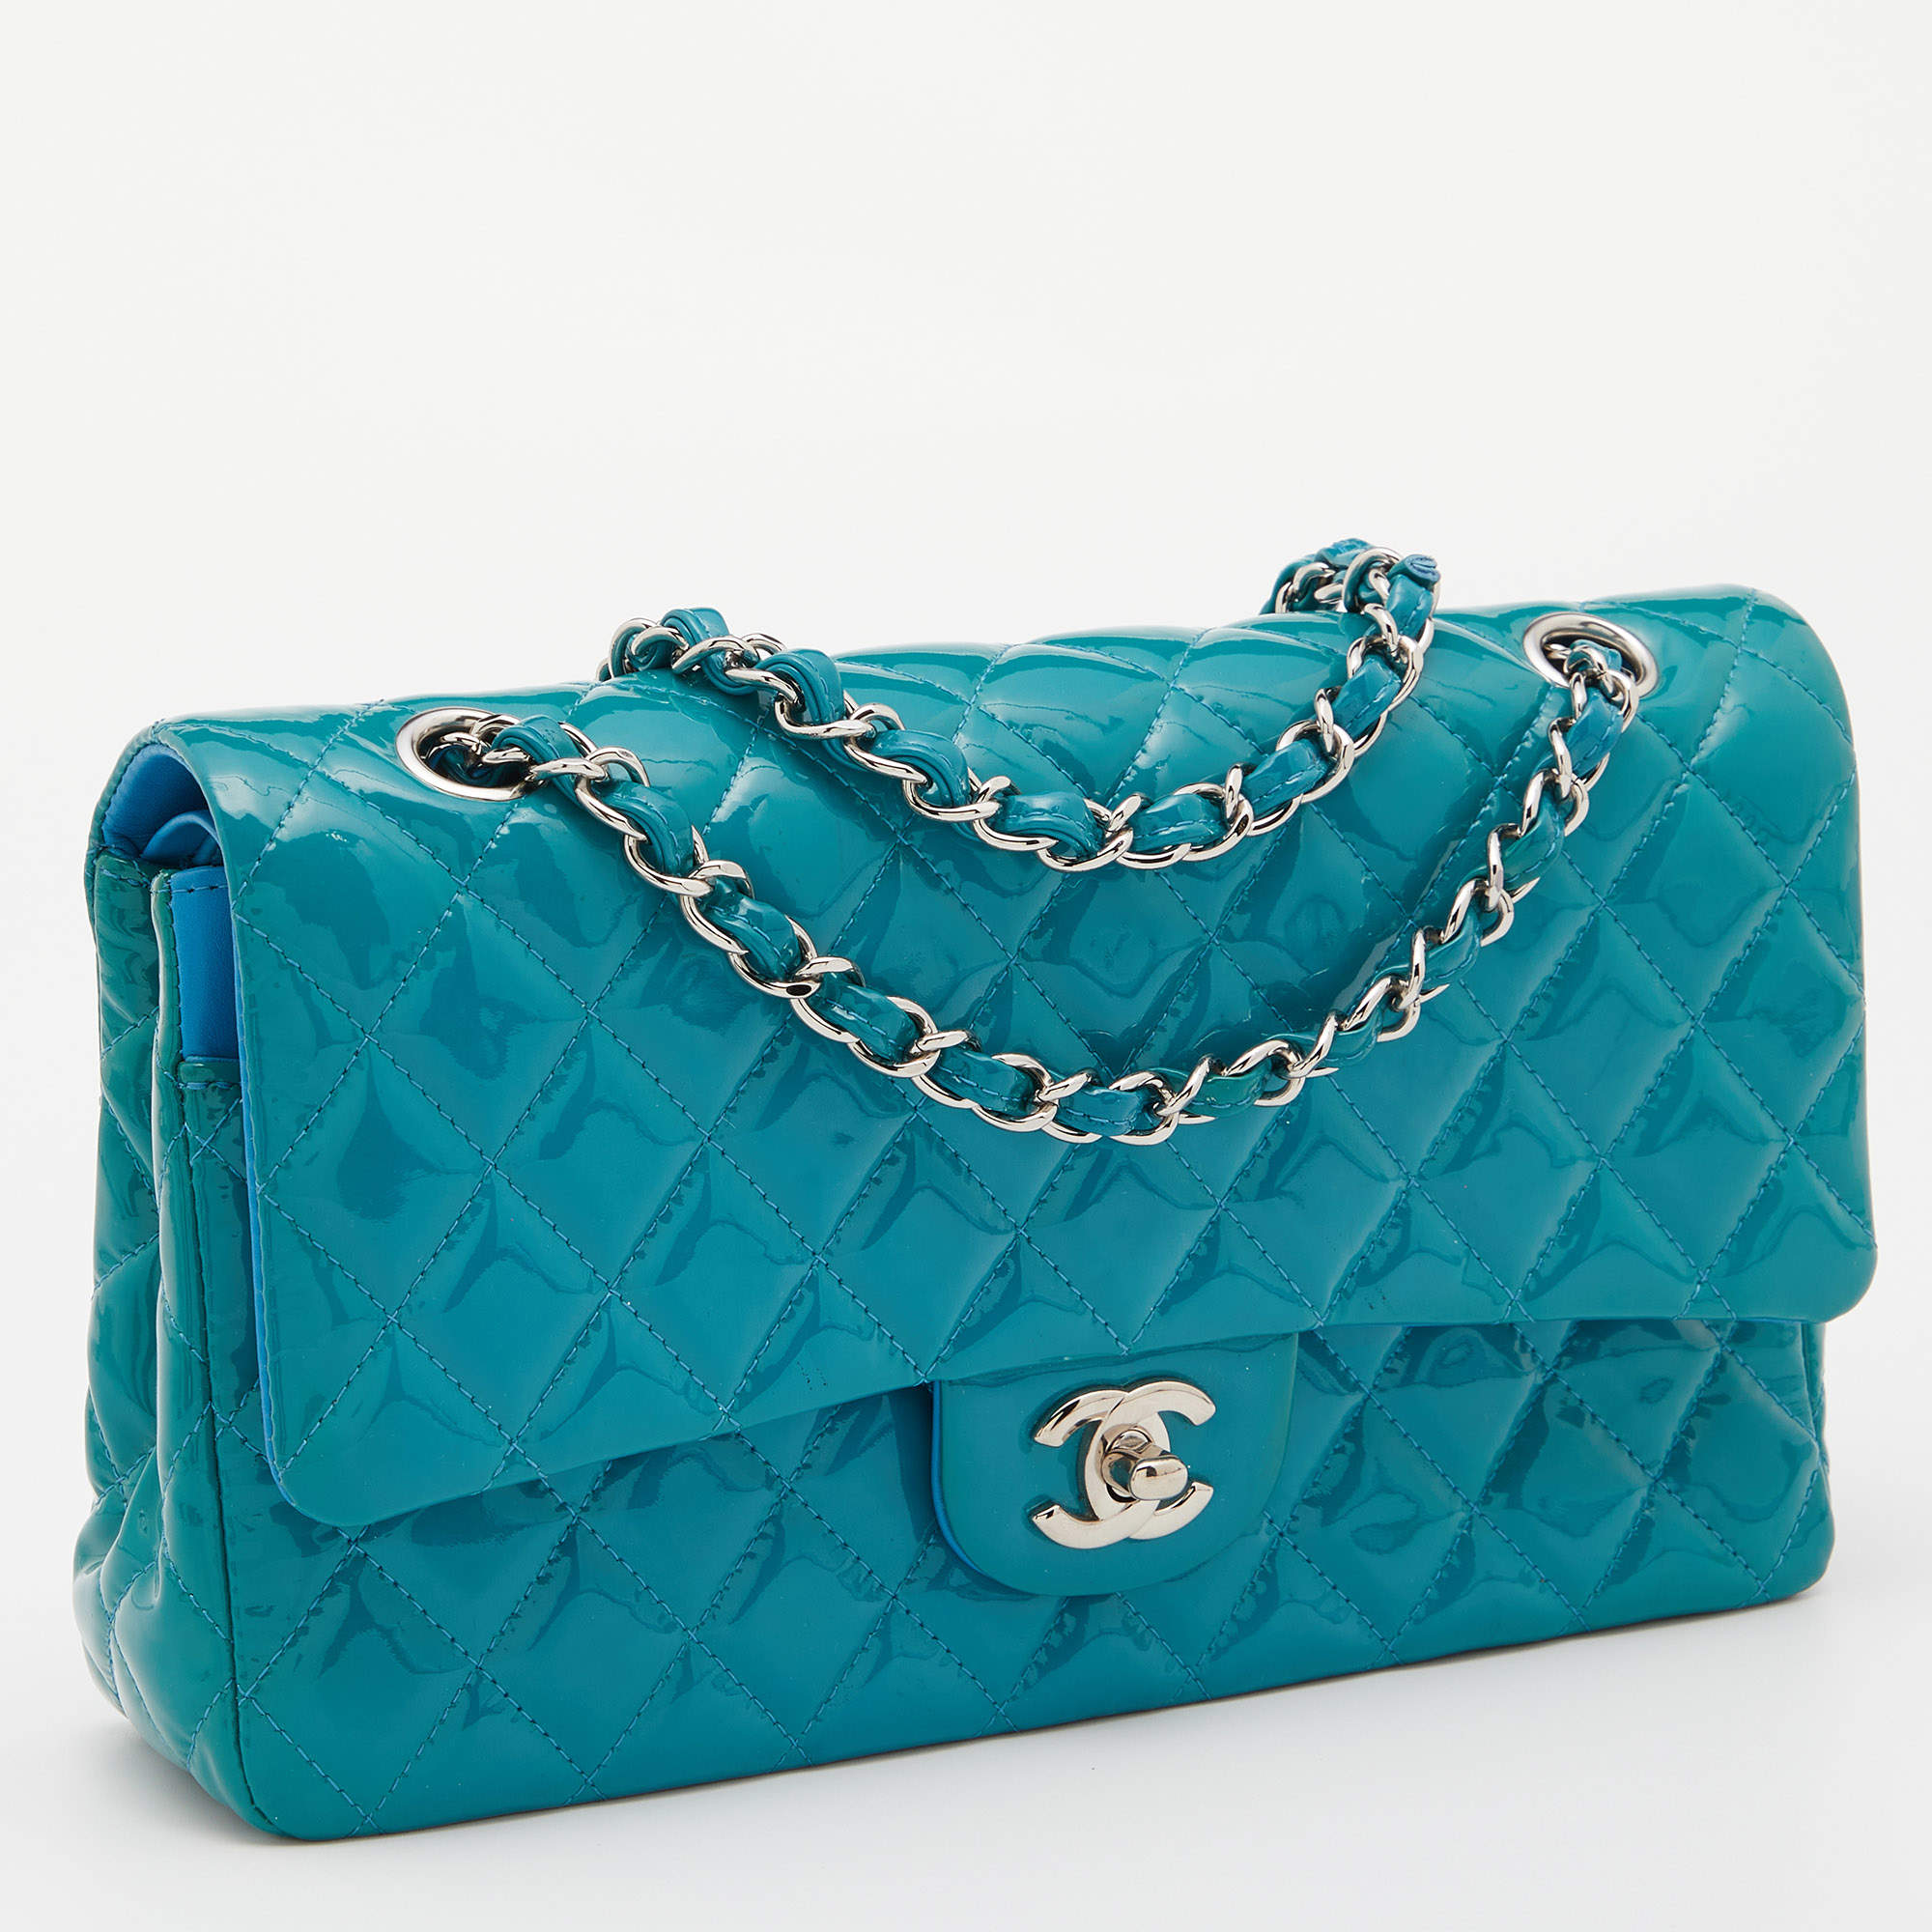 Chanel Blue Quilted Patent Leather Medium Classic Double Flap Bag